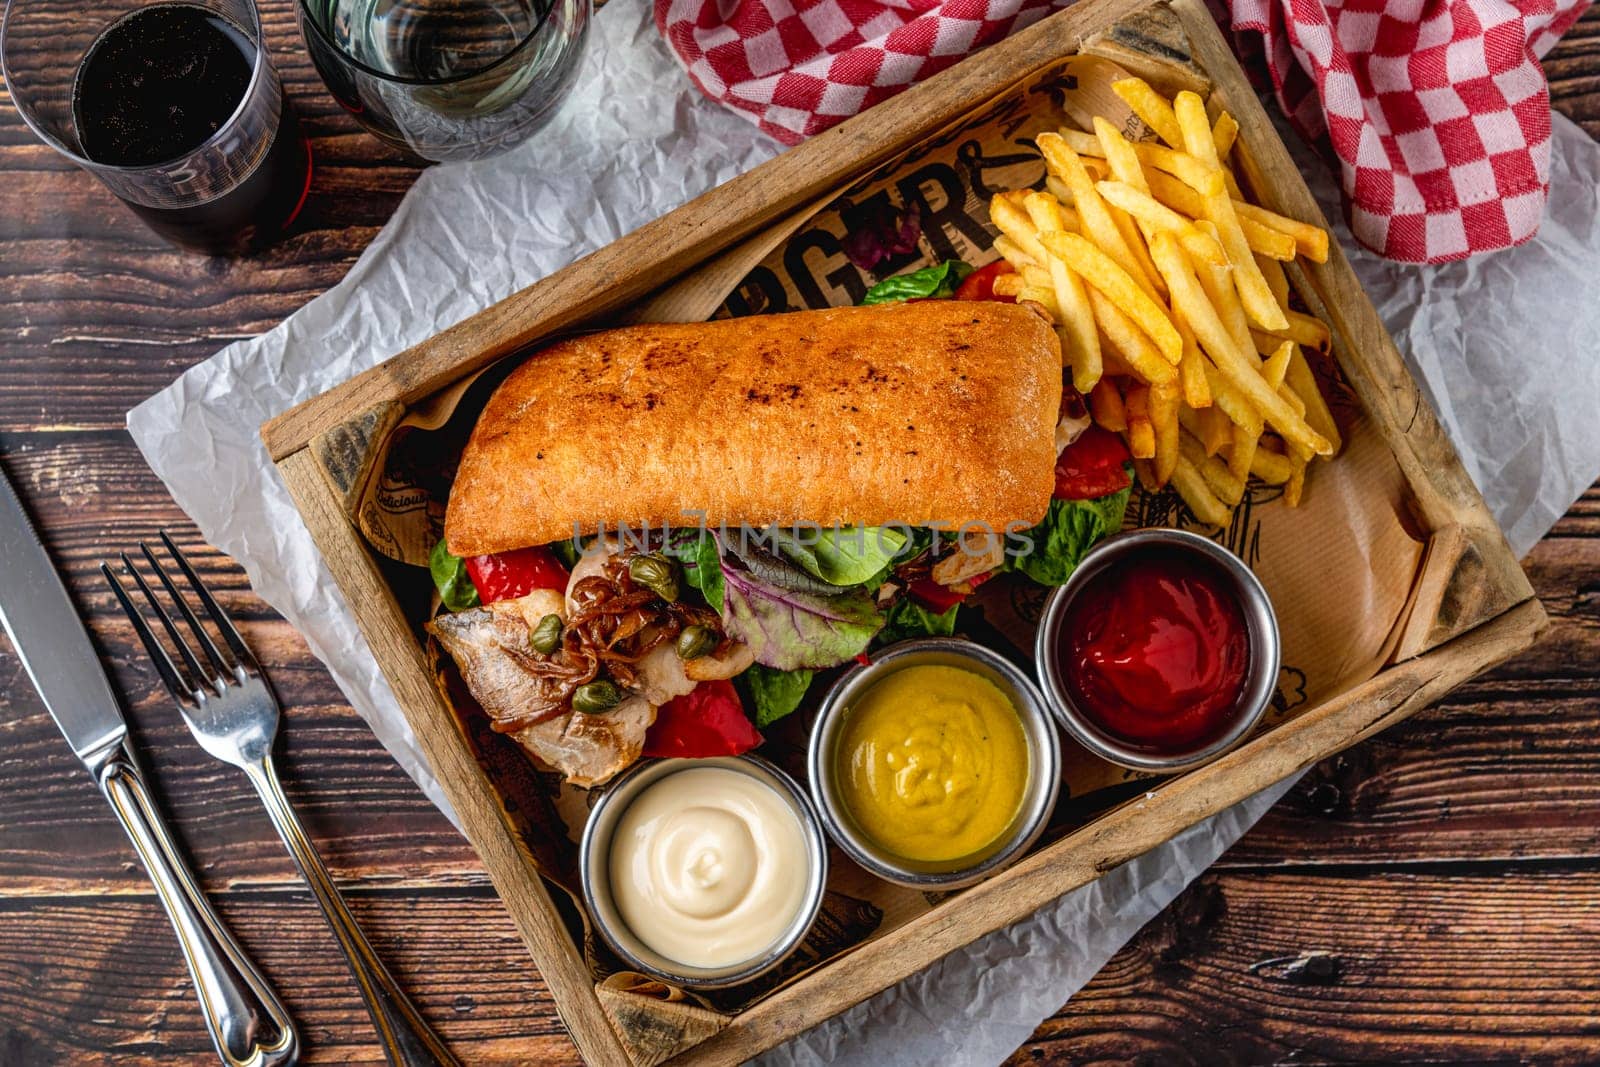 Steak sandwich with sauces and french fries on wooden table